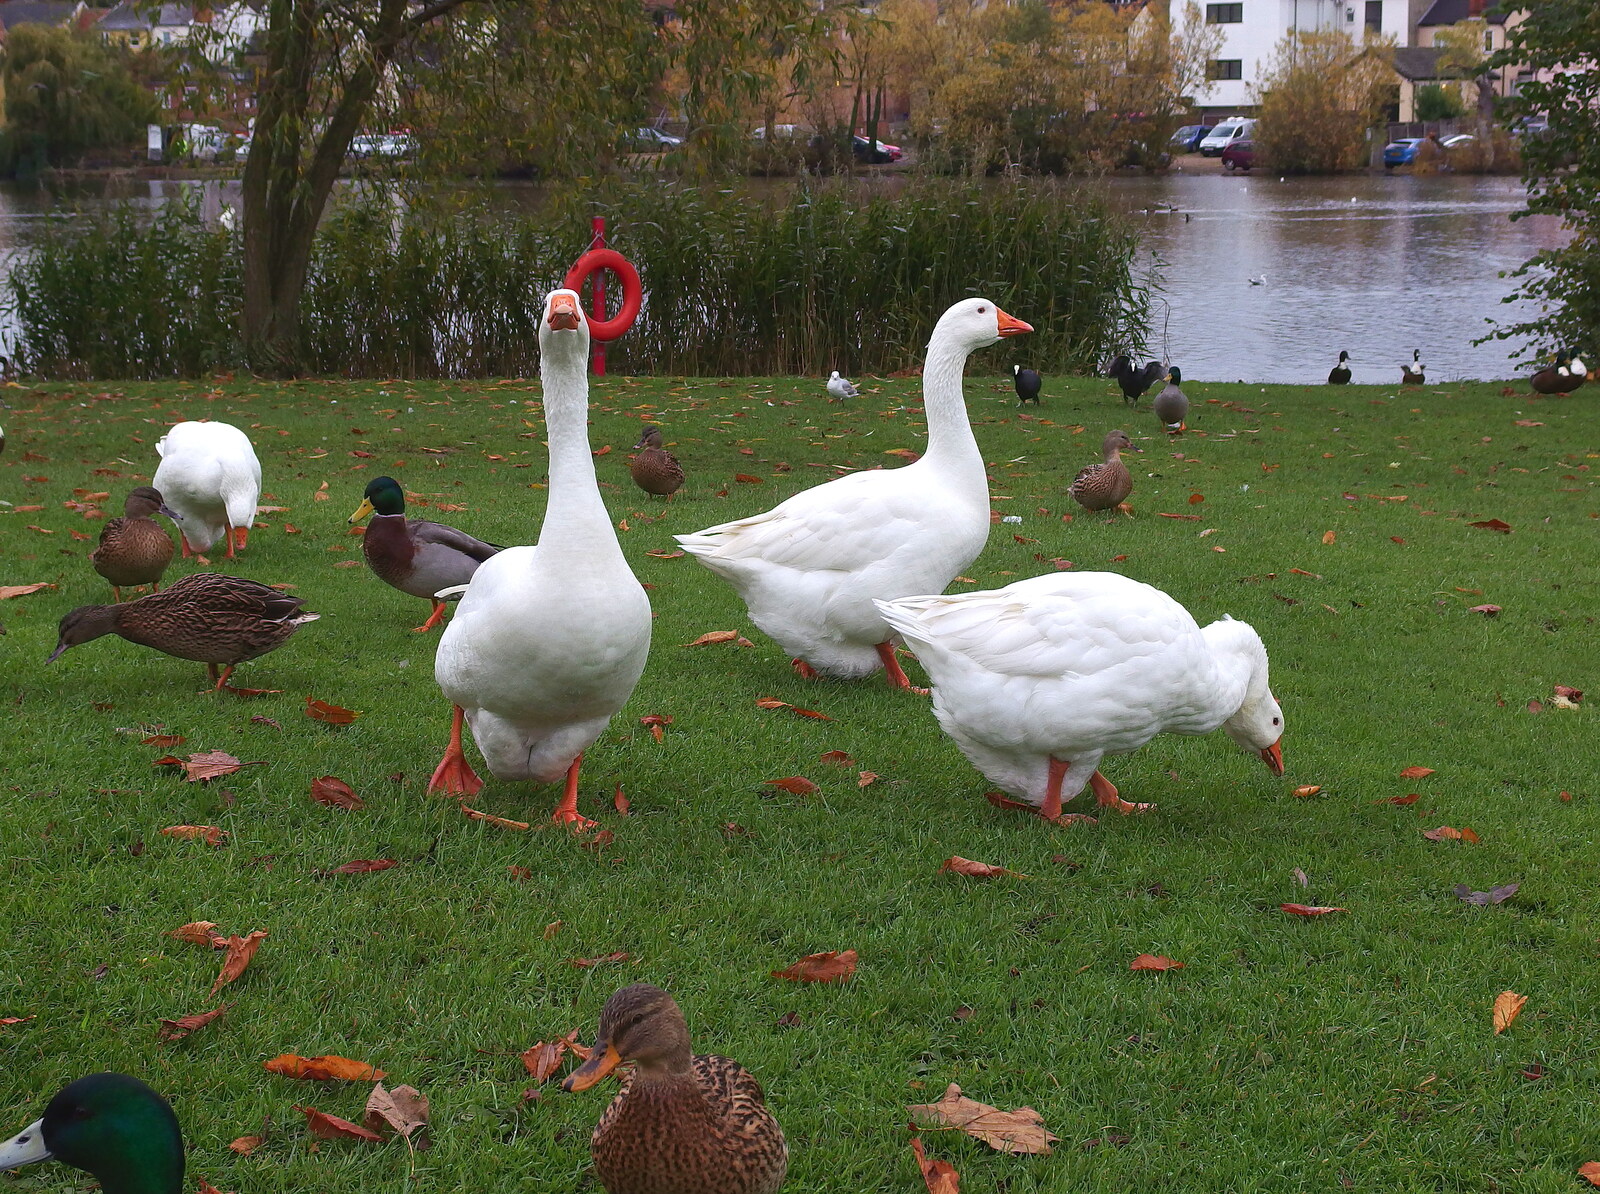 A November Miscellany and Building Progress, Thornham and Brome, Suffolk - 17th November 2013: Geese with attitude